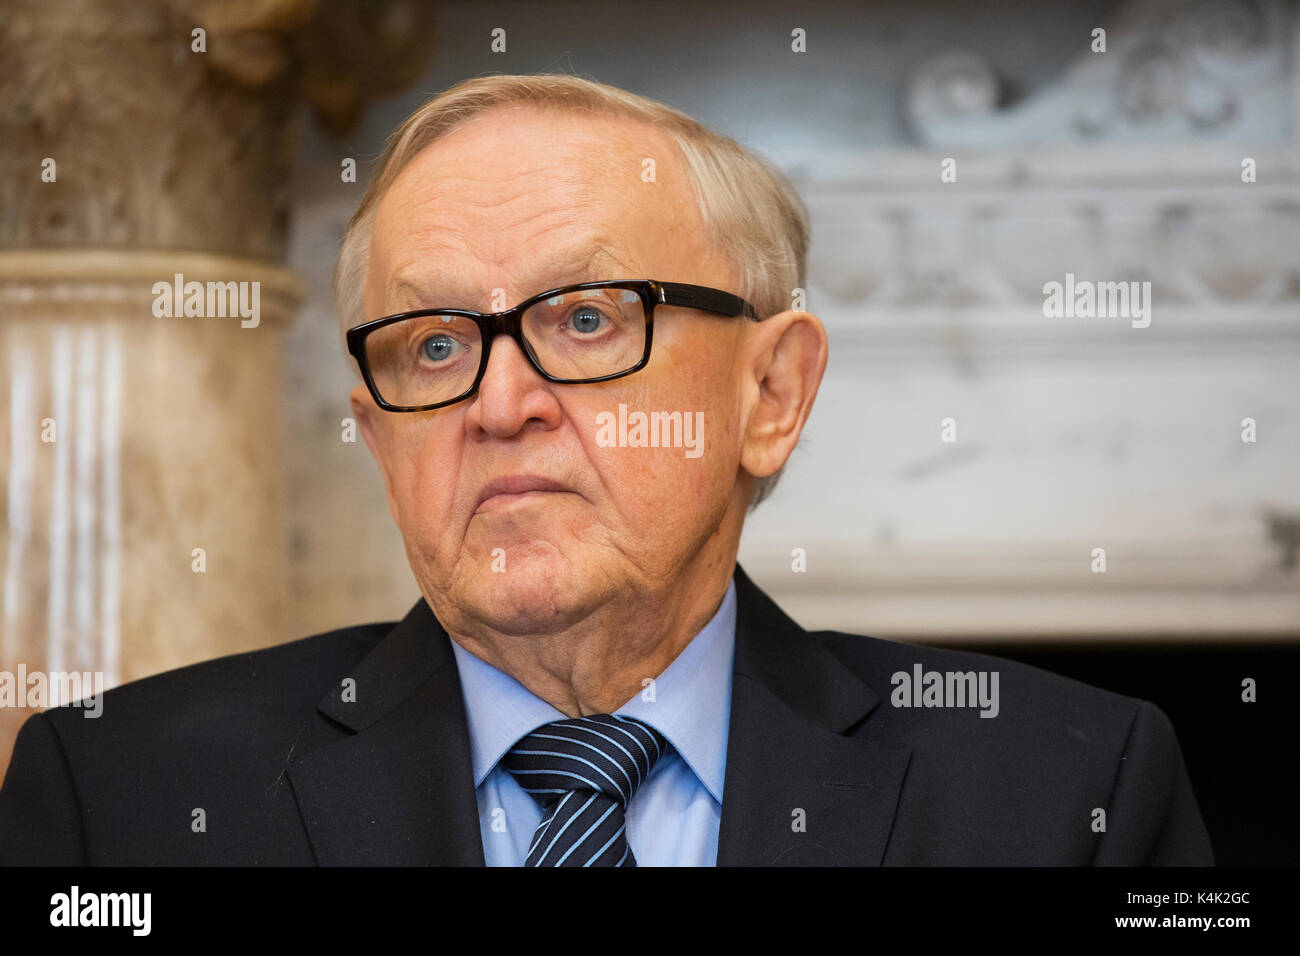 Dublin, Ireland. 6th Sep, 2017. Former President of Finland and Nobel Laureate, Mr. Martti Ahtisaari was in Ireland today to deliver a keynote address on “The Role of the EU in Conflict Resolution”. Martti Ahtisaari was awarded the Nobel Peace Prize in 2008 for “his important efforts, on several continents and over more than three decades, to resolve international conflicts”. Amongst these was his role in the Northern Ireland Peace Process on the crucial and very sensitive issue of weapons decommissioning. Photo by Peter Cavanagh - Must Credit Stock Photo